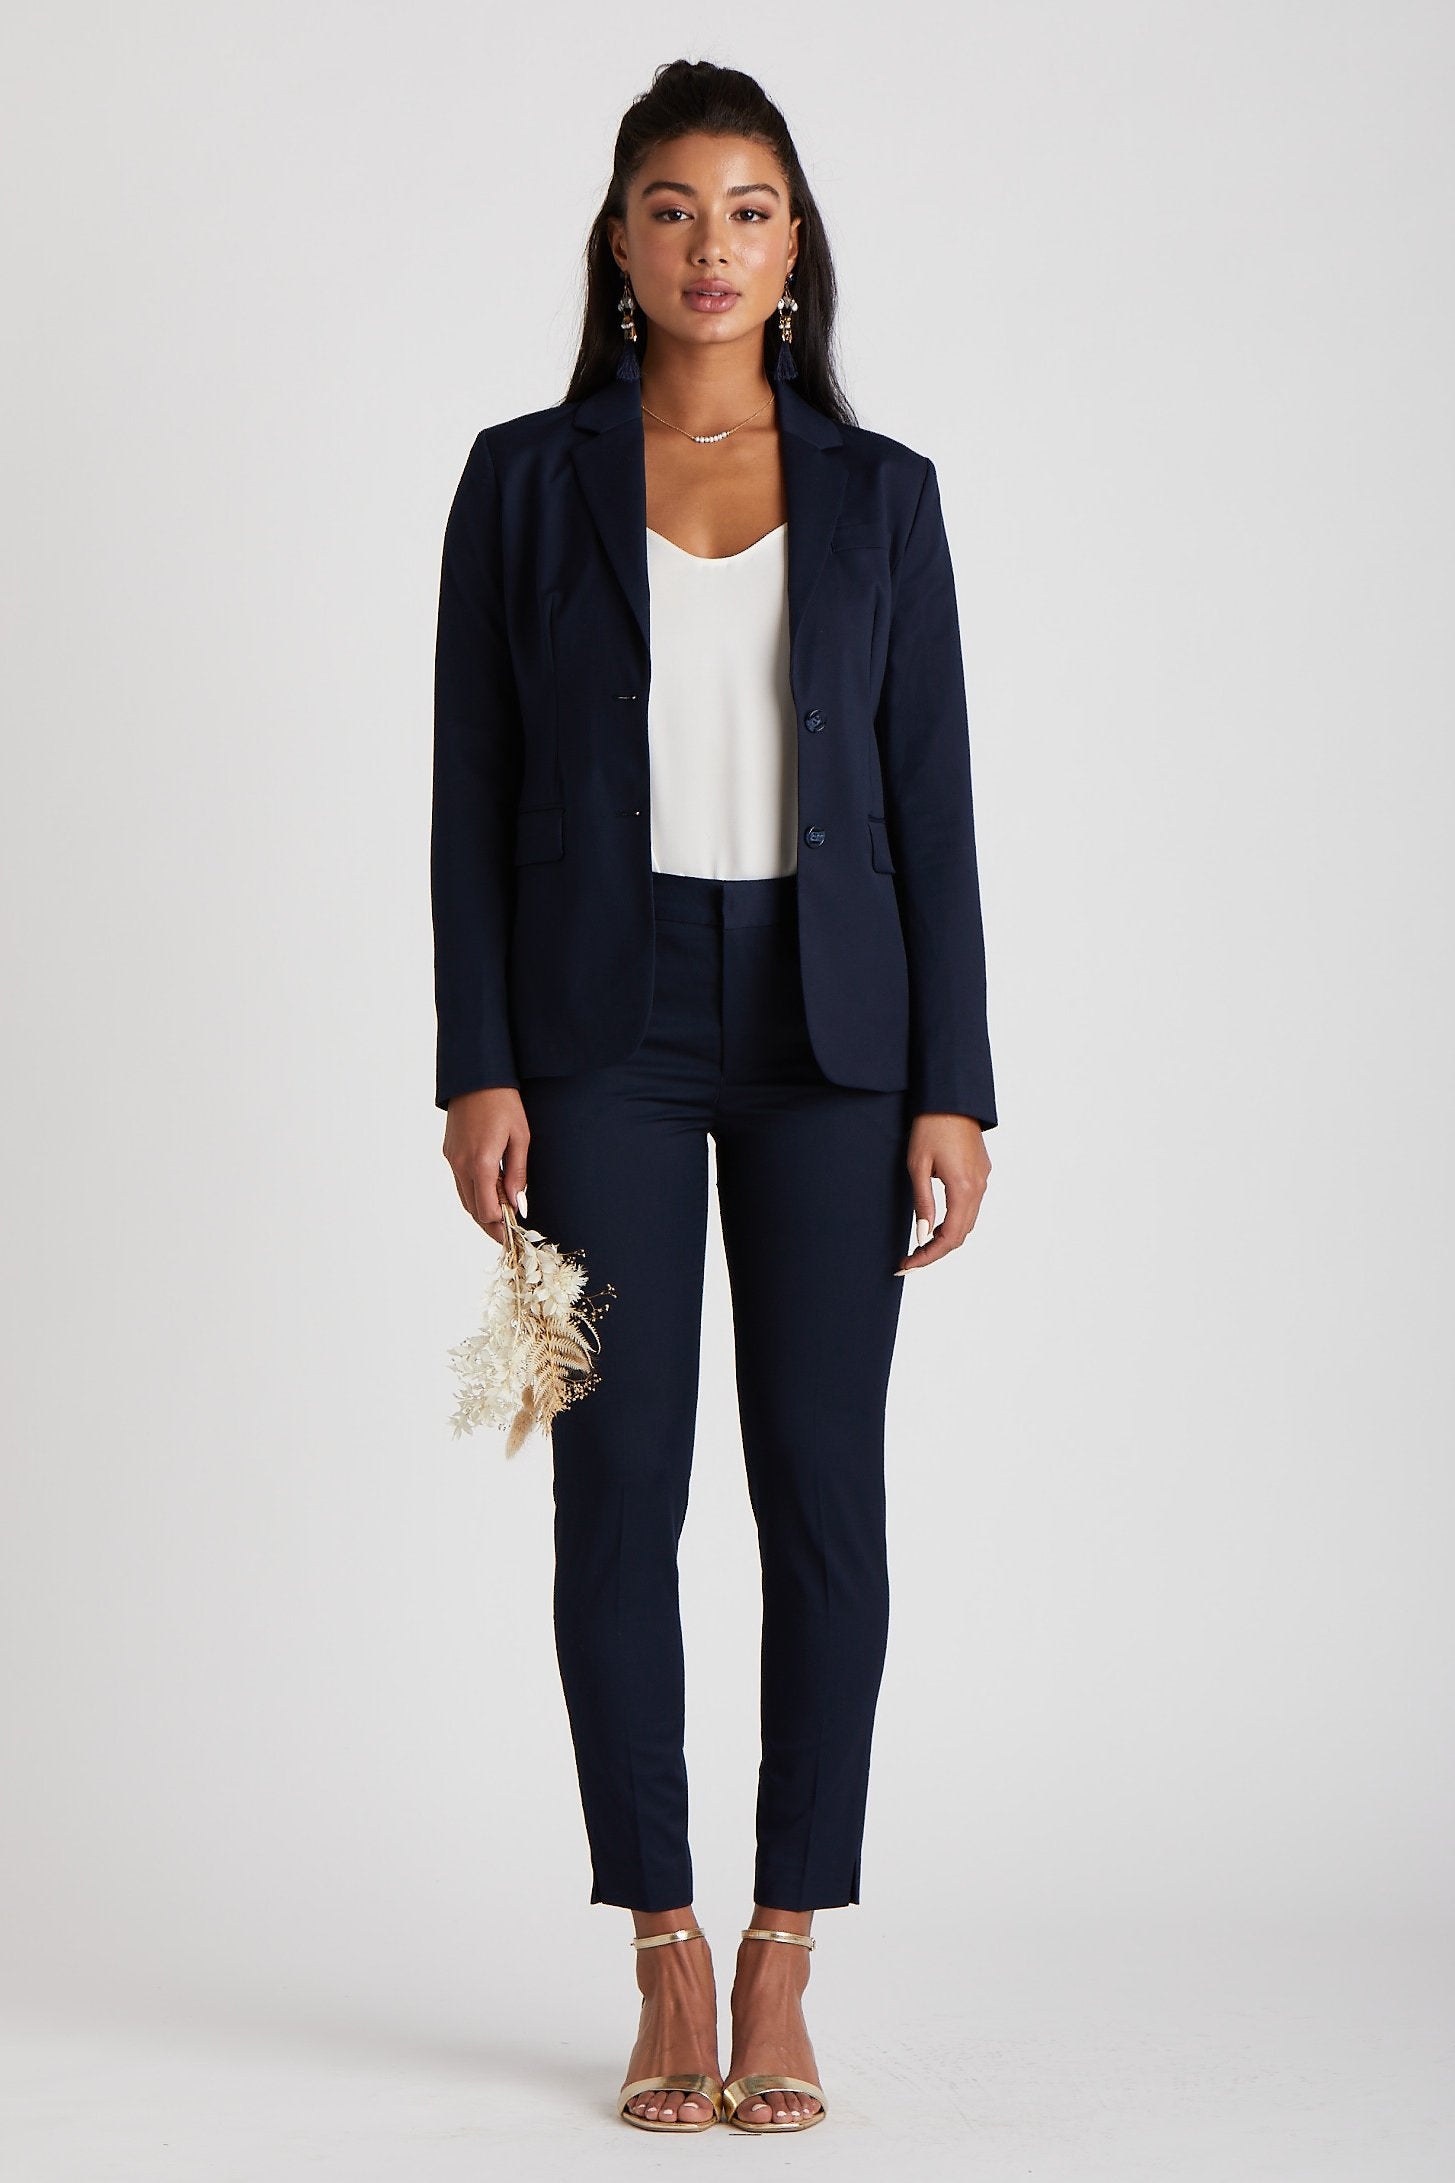 How to Style a Navy Blue Suit Jacket